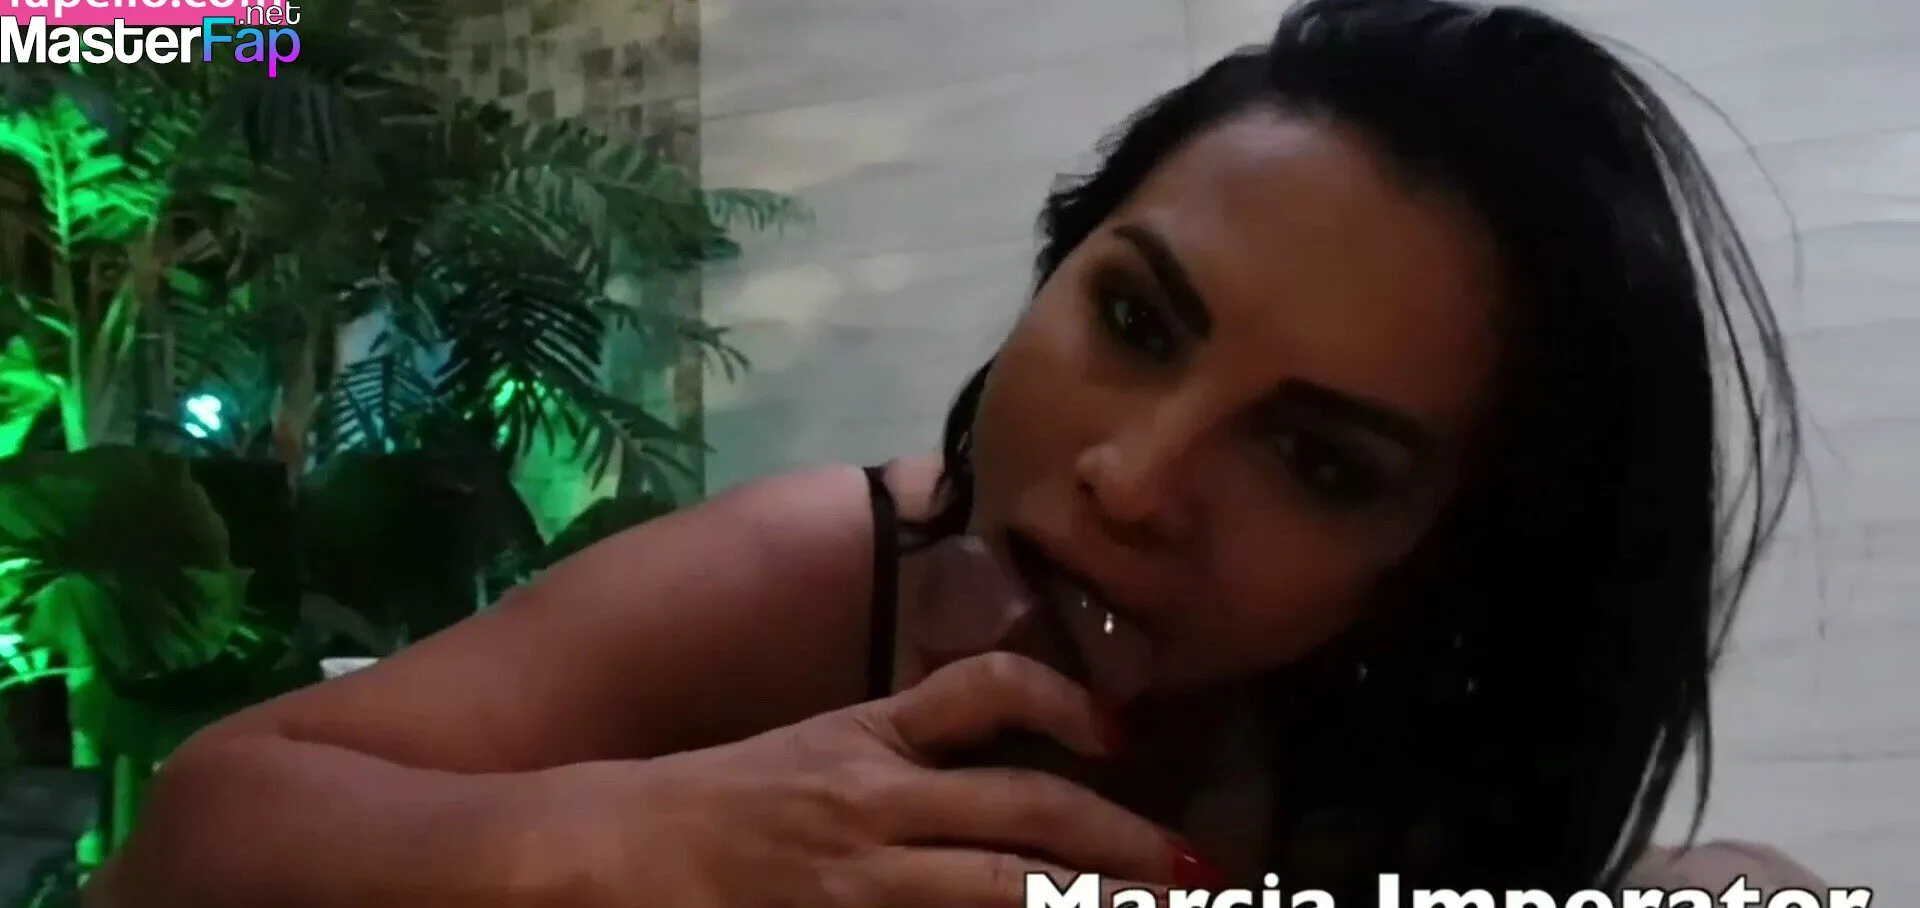 Marcia imperator onlyfans